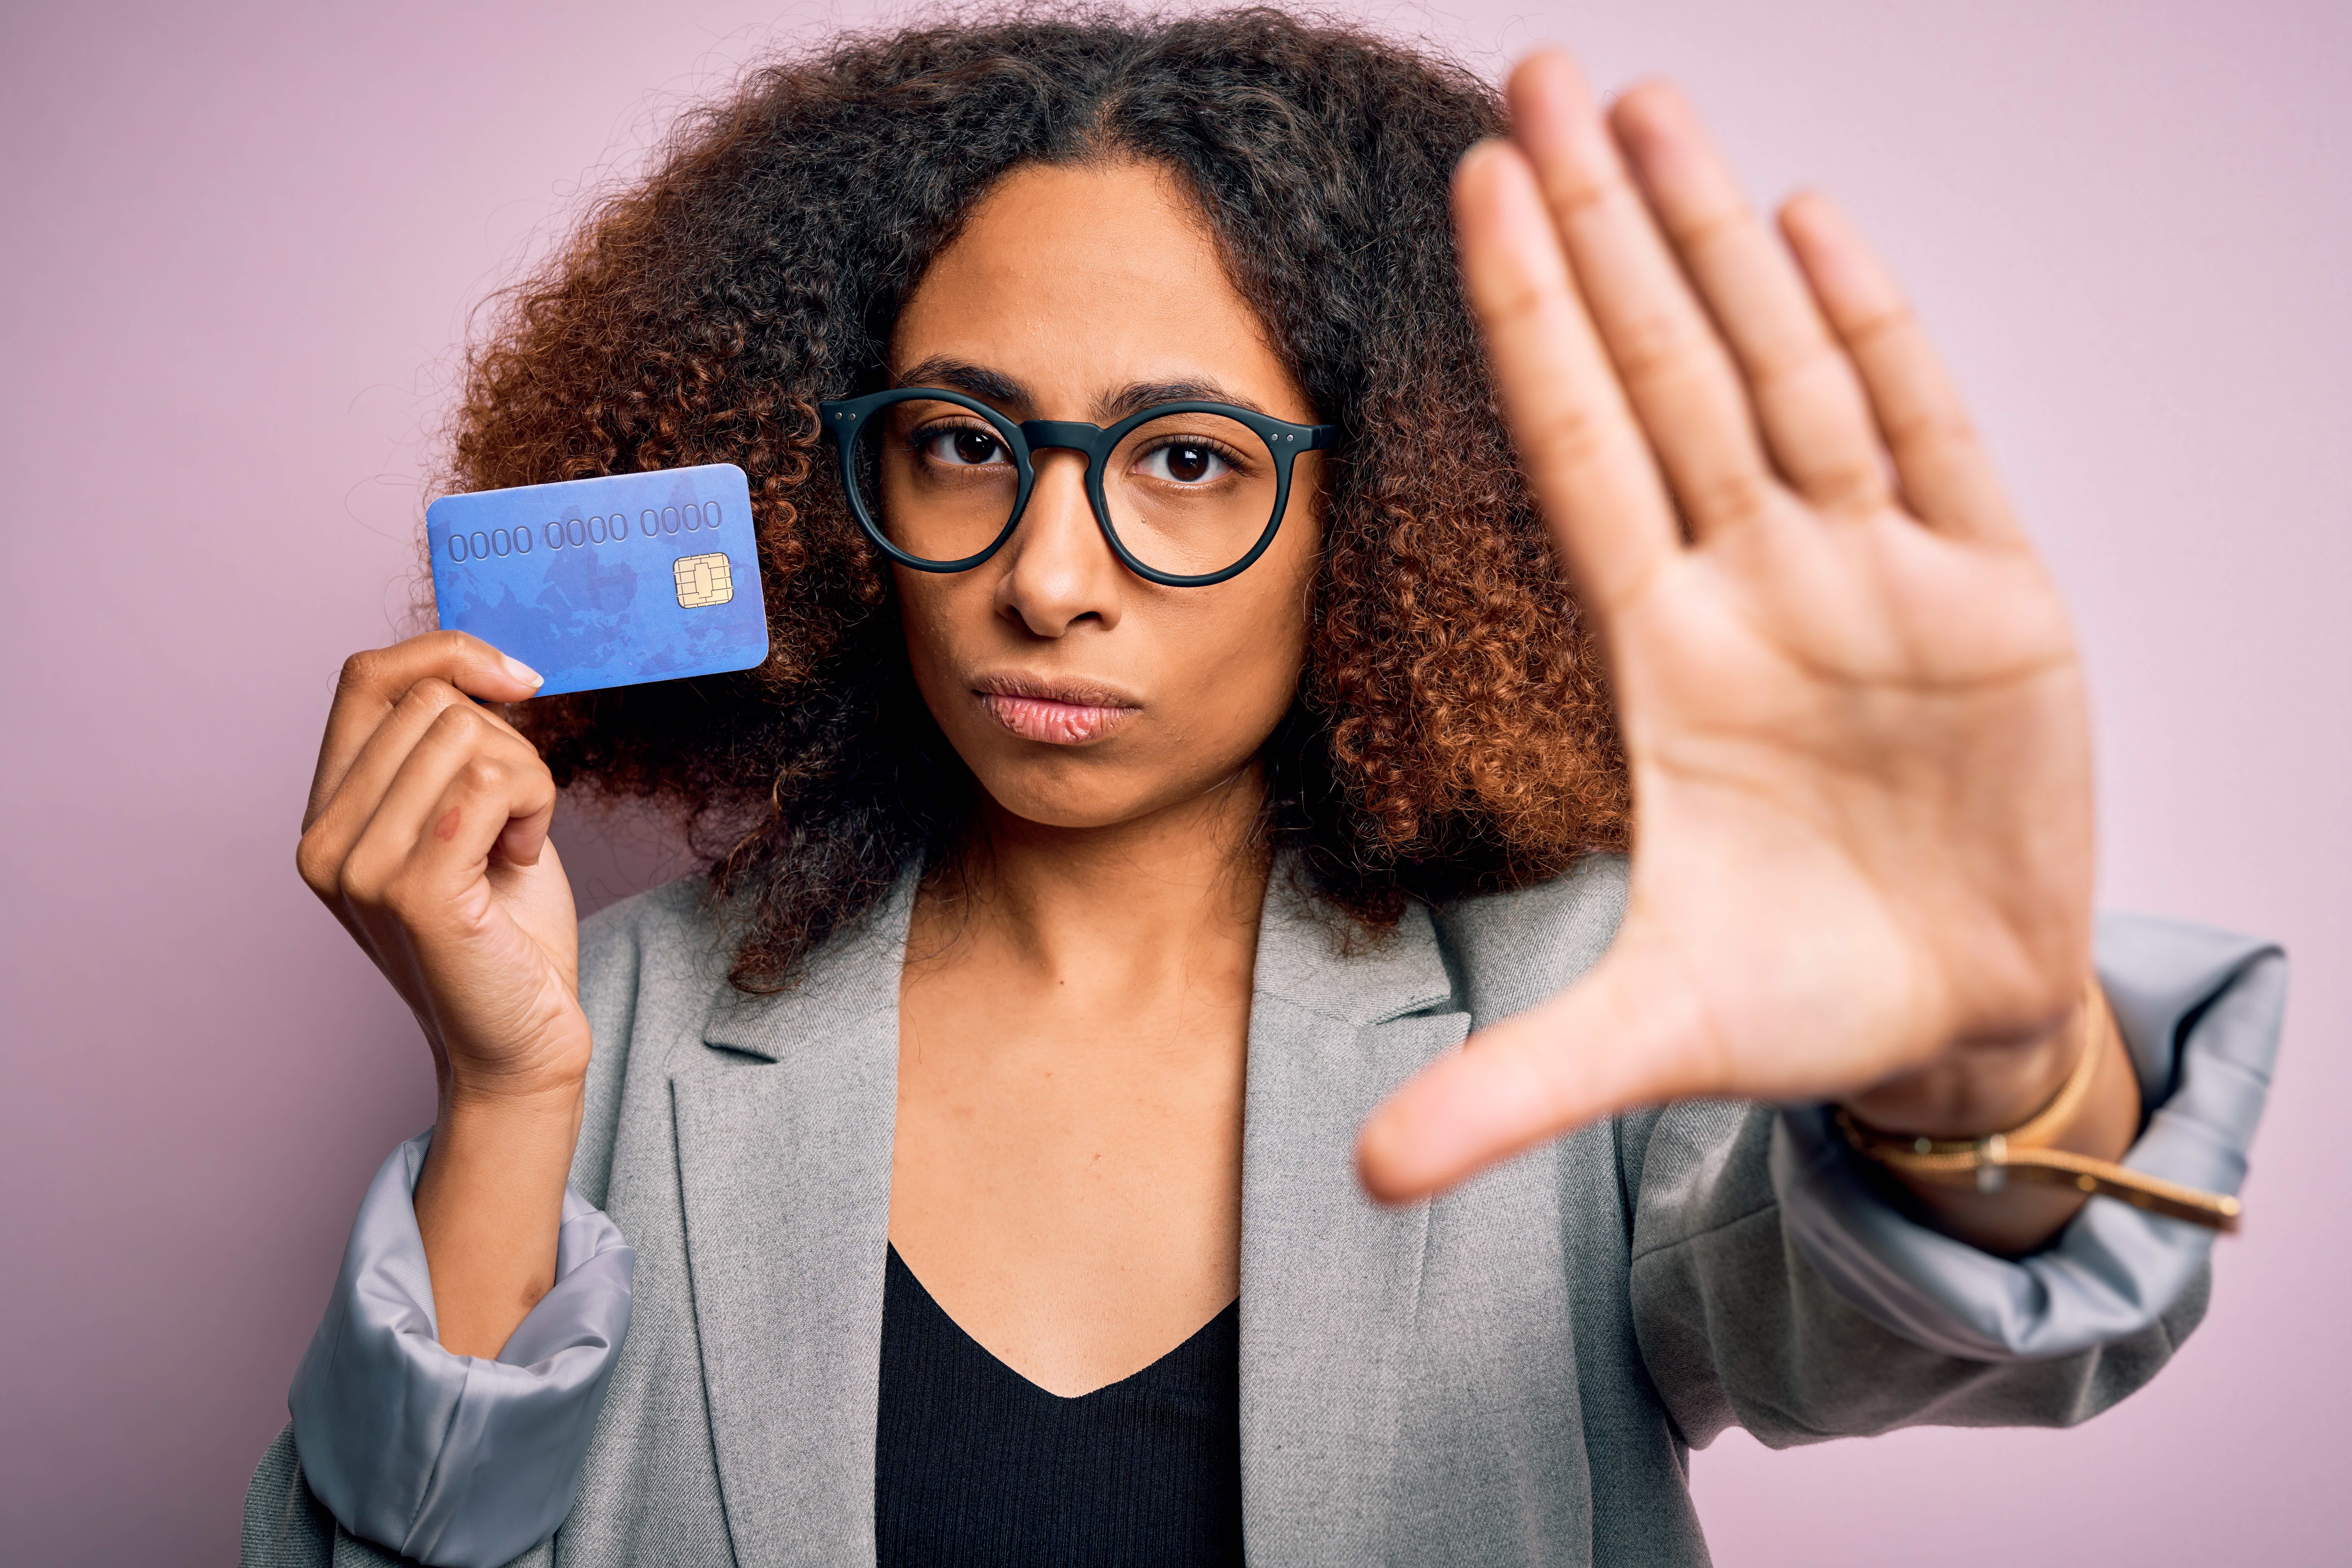 Read our tips on how to spend with your secured credit card! Source: Adobe Stock.